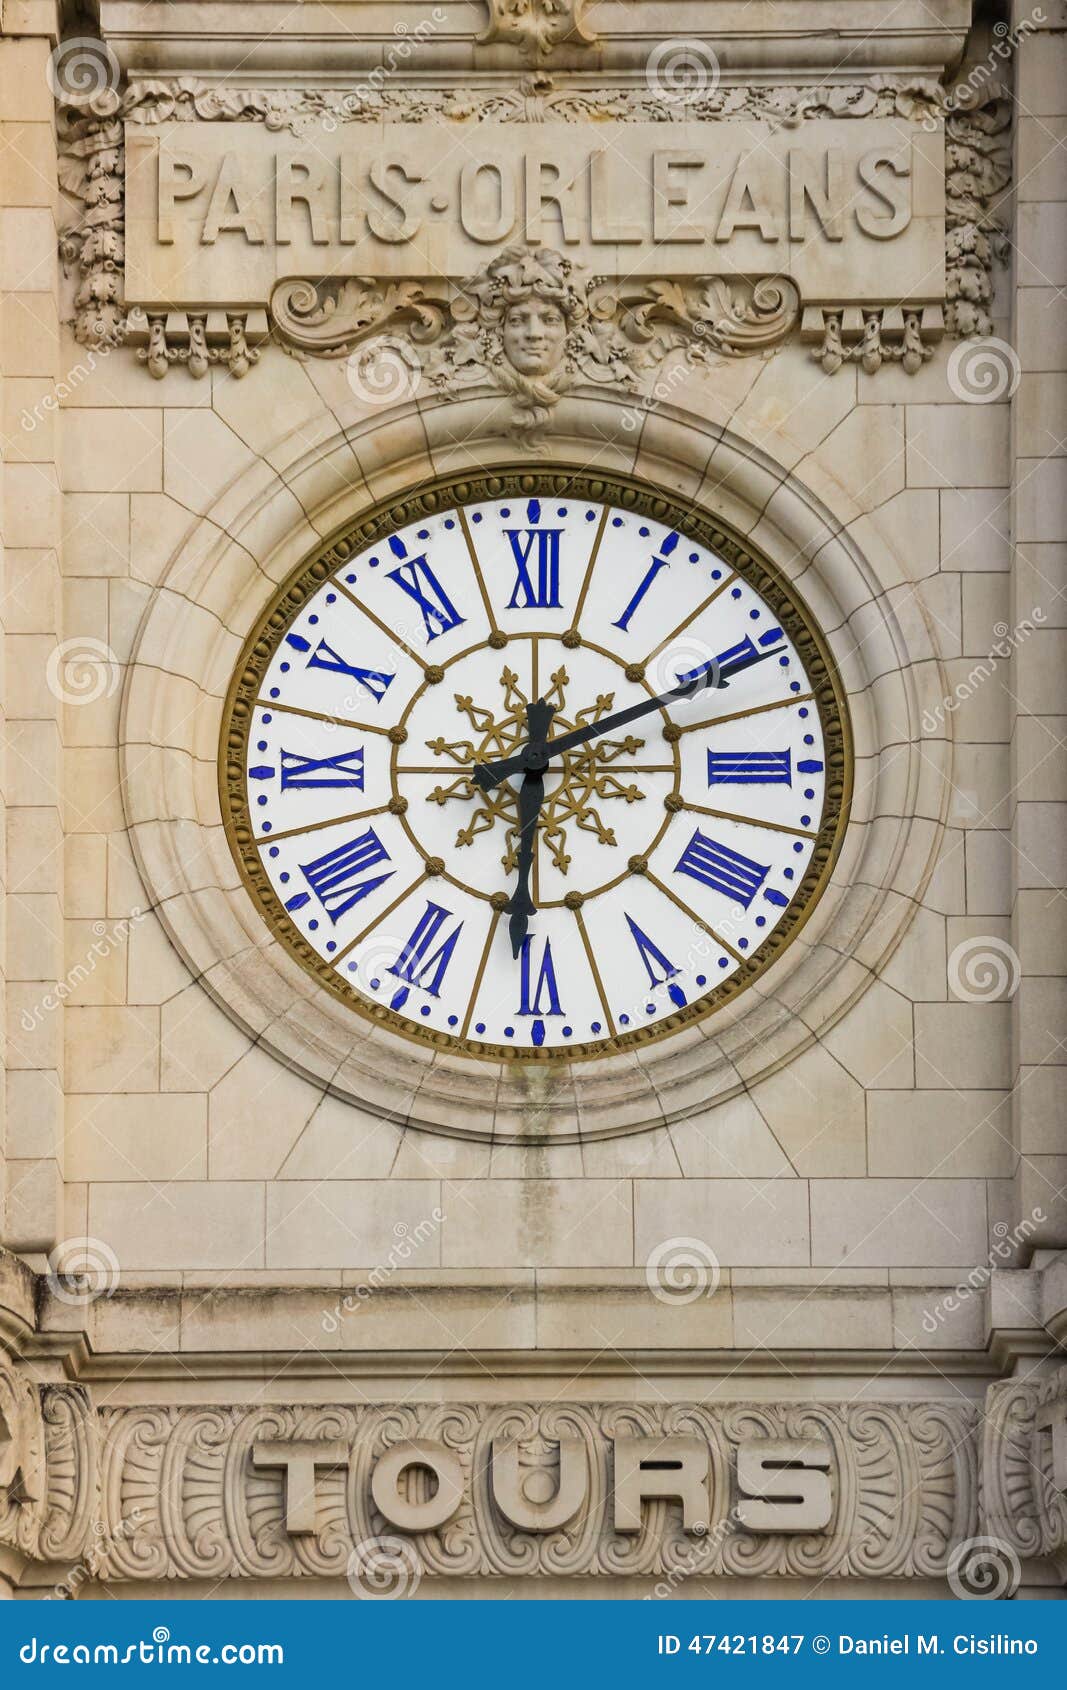 Train Station Clock Tours France Stock Image Image Of Deco Gate